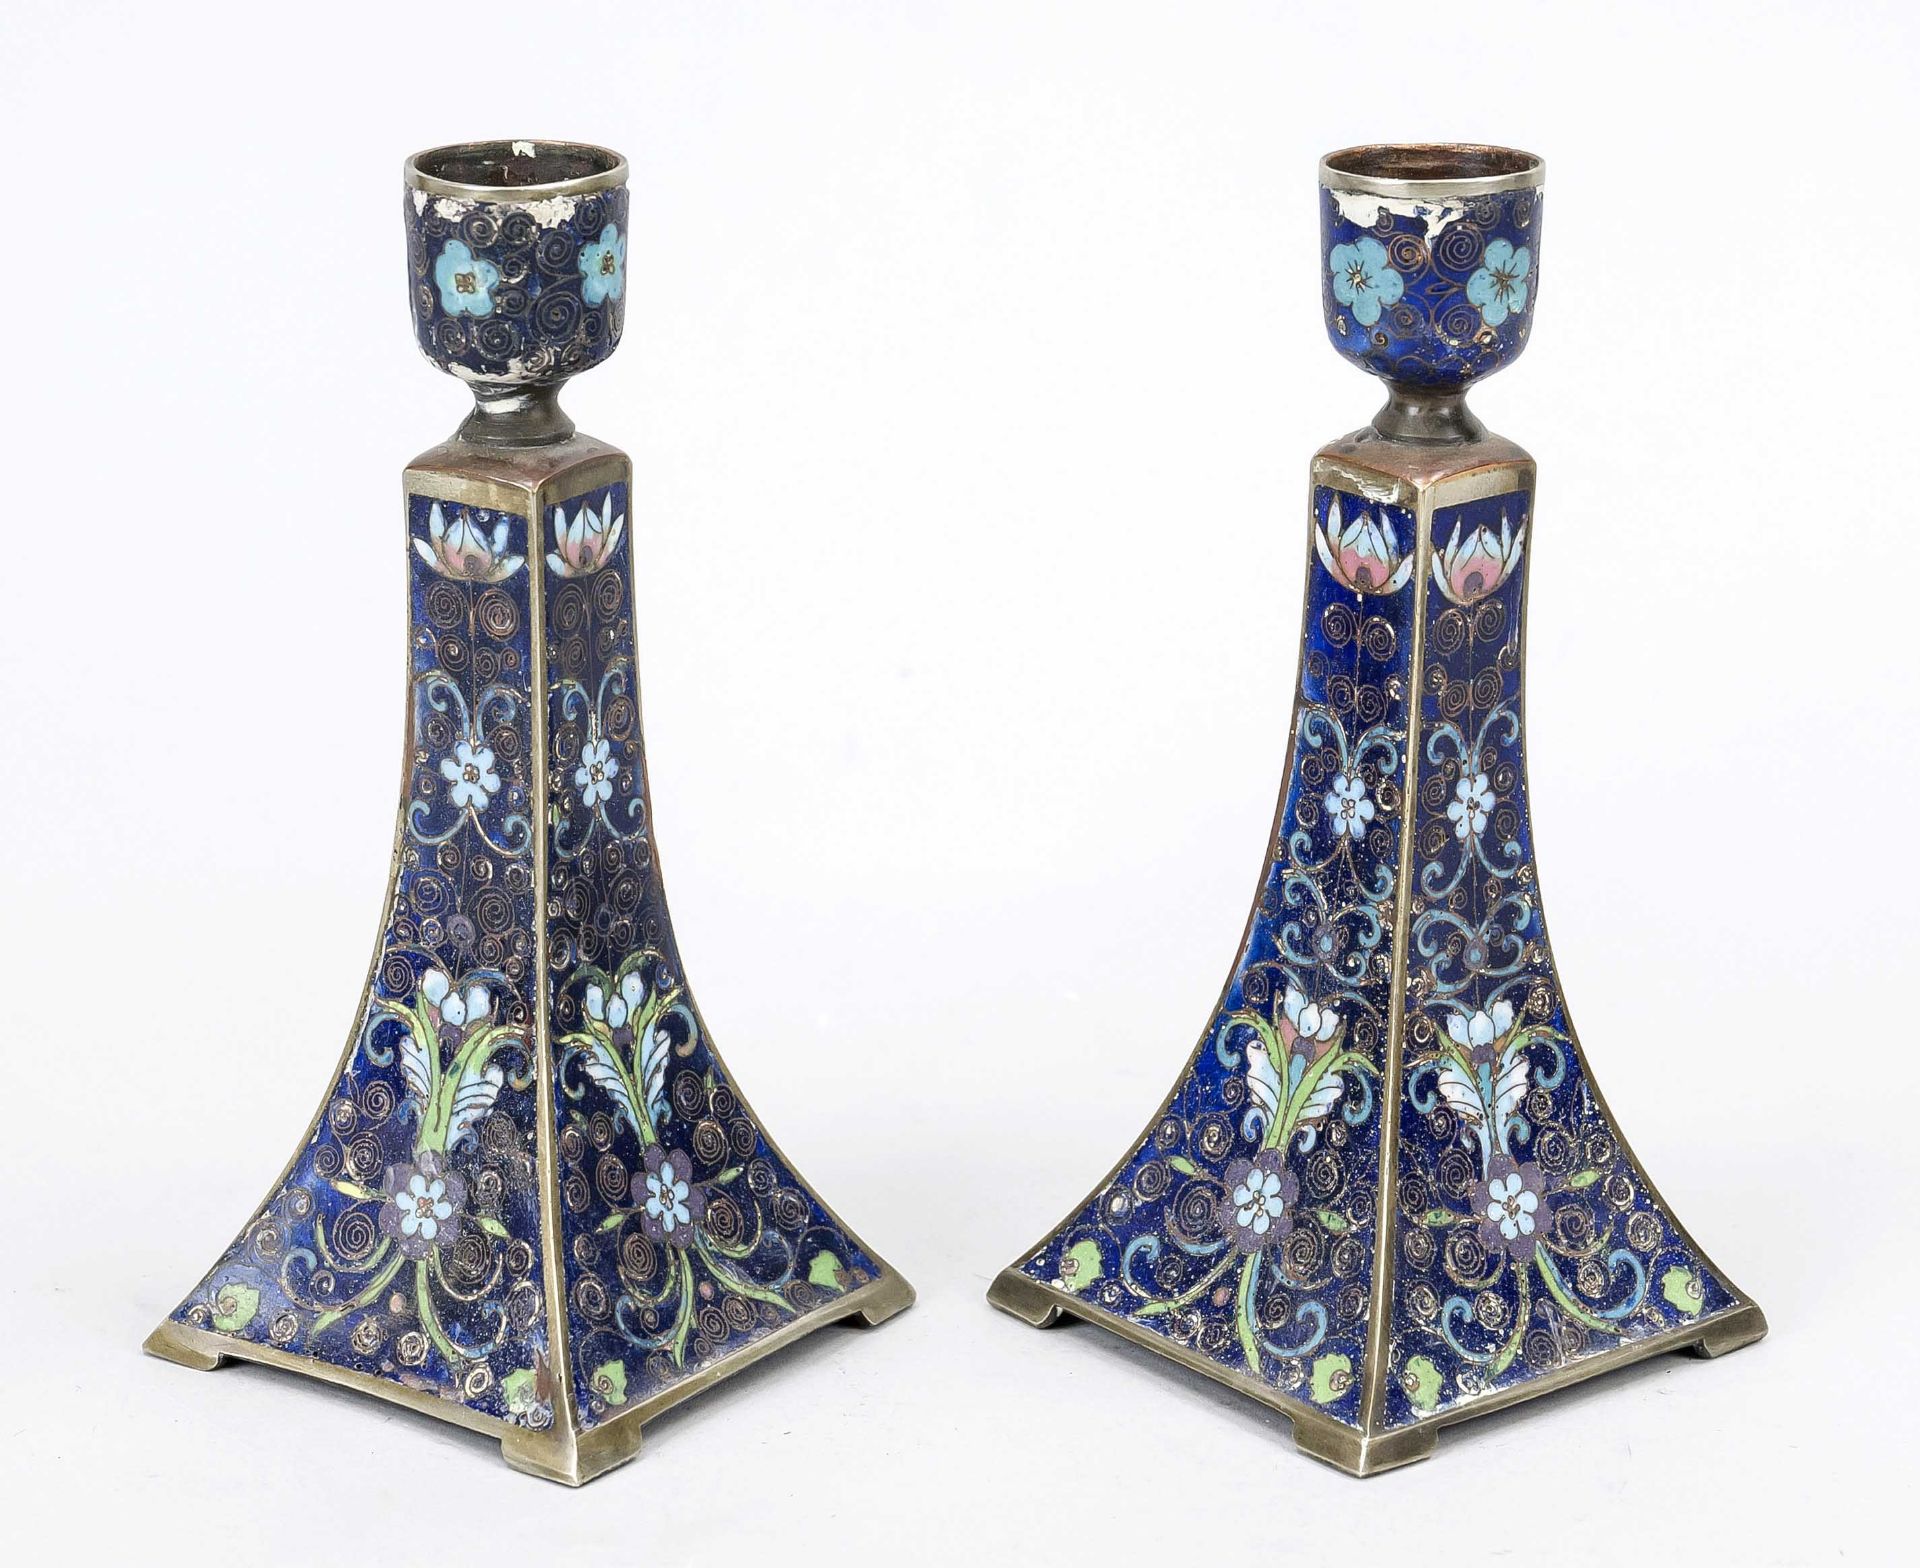 A pair of cloisonné candlesticks, Japan or China, circa 1900, lotus flowers and tendrils on a